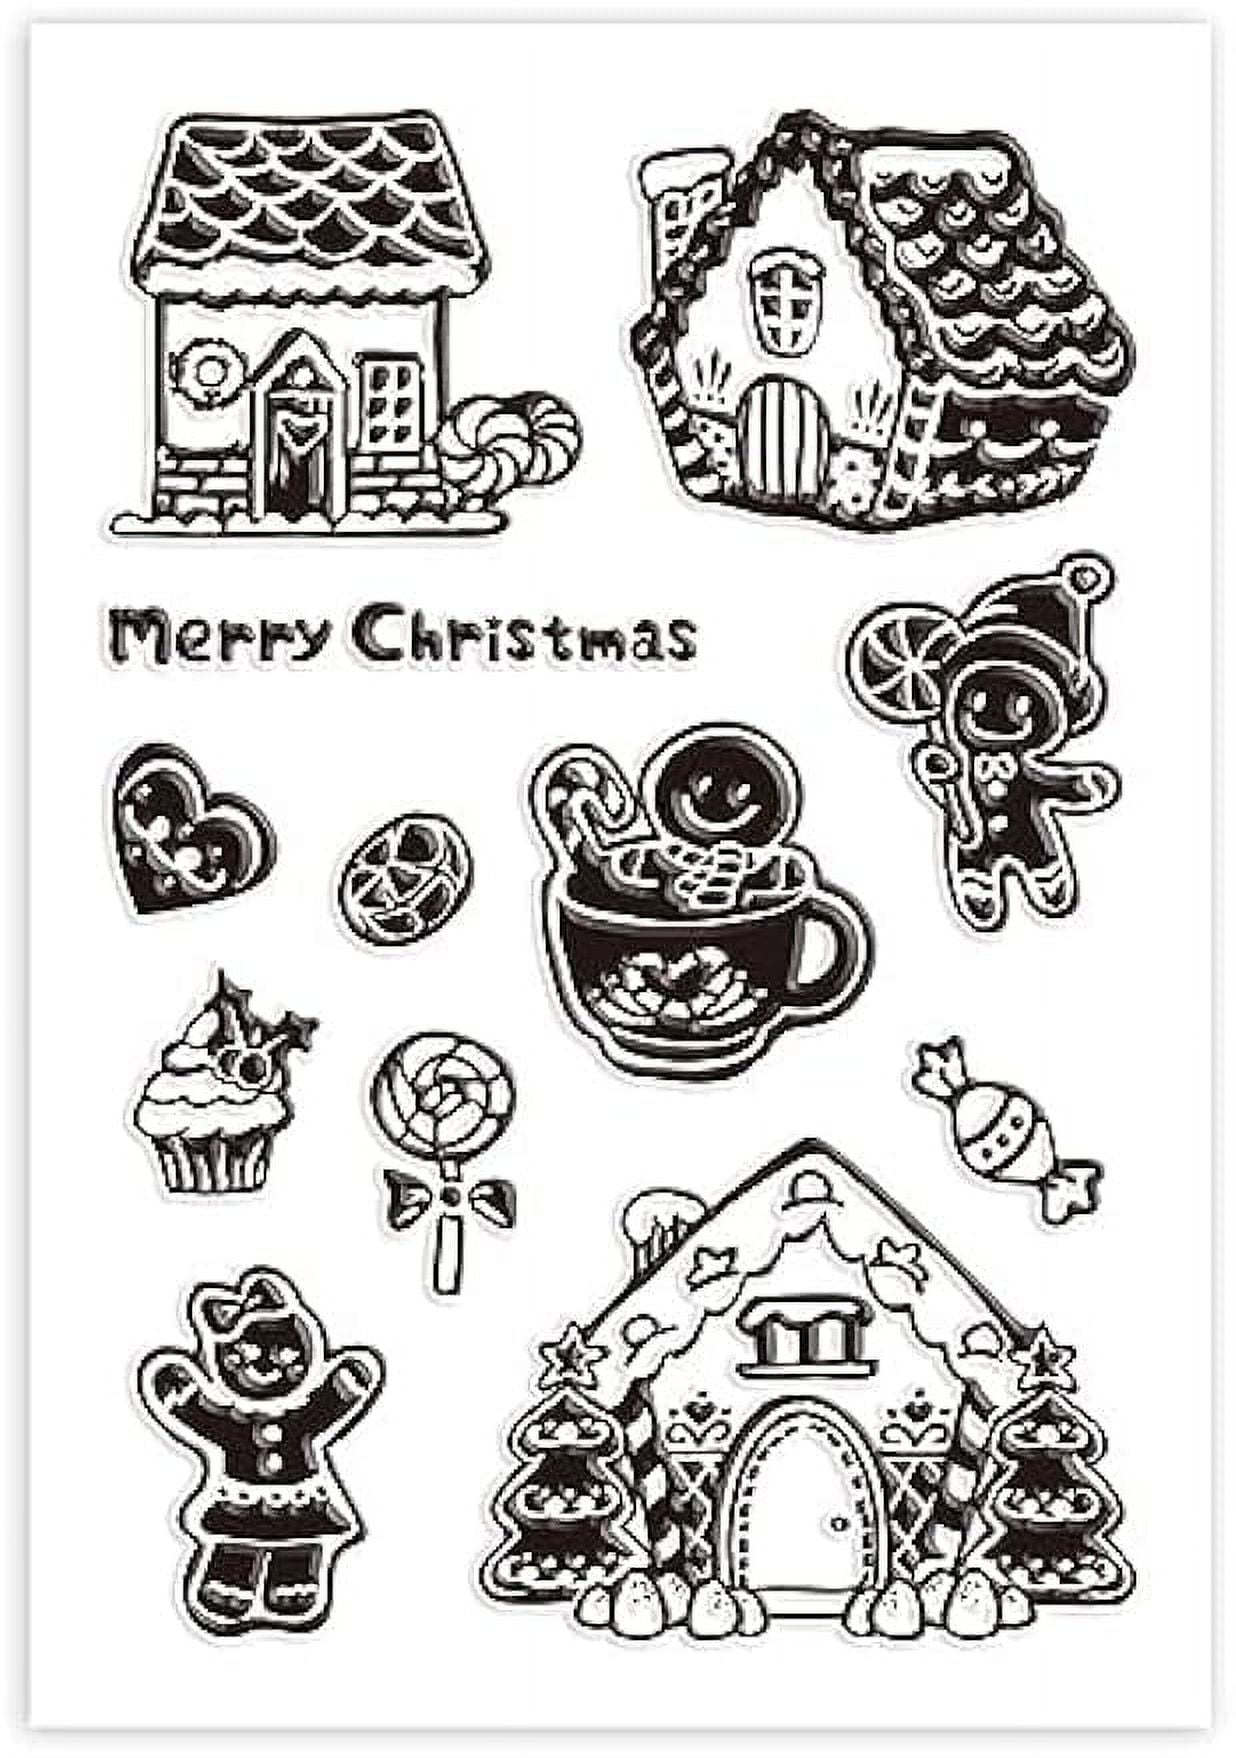 Clear Stamps for Card Making, Christmas Deer Transparent Rubber Stamps for  Journal DIY Scrapbook Decor Handmade Crafts T1622 - AliExpress